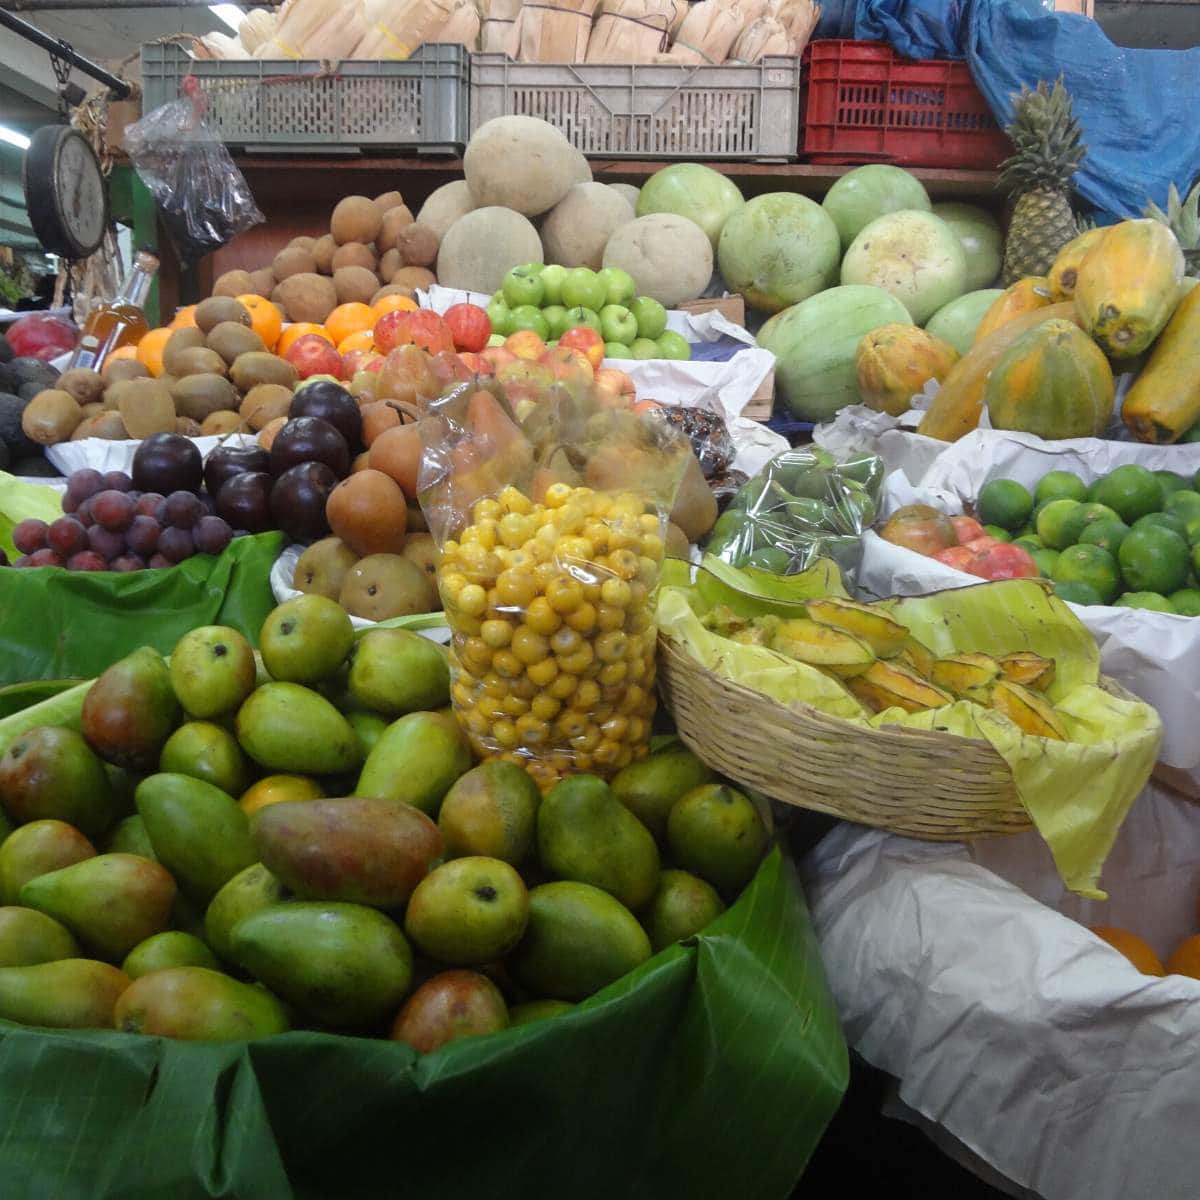 A variety of fruit in a market in Guatemala.